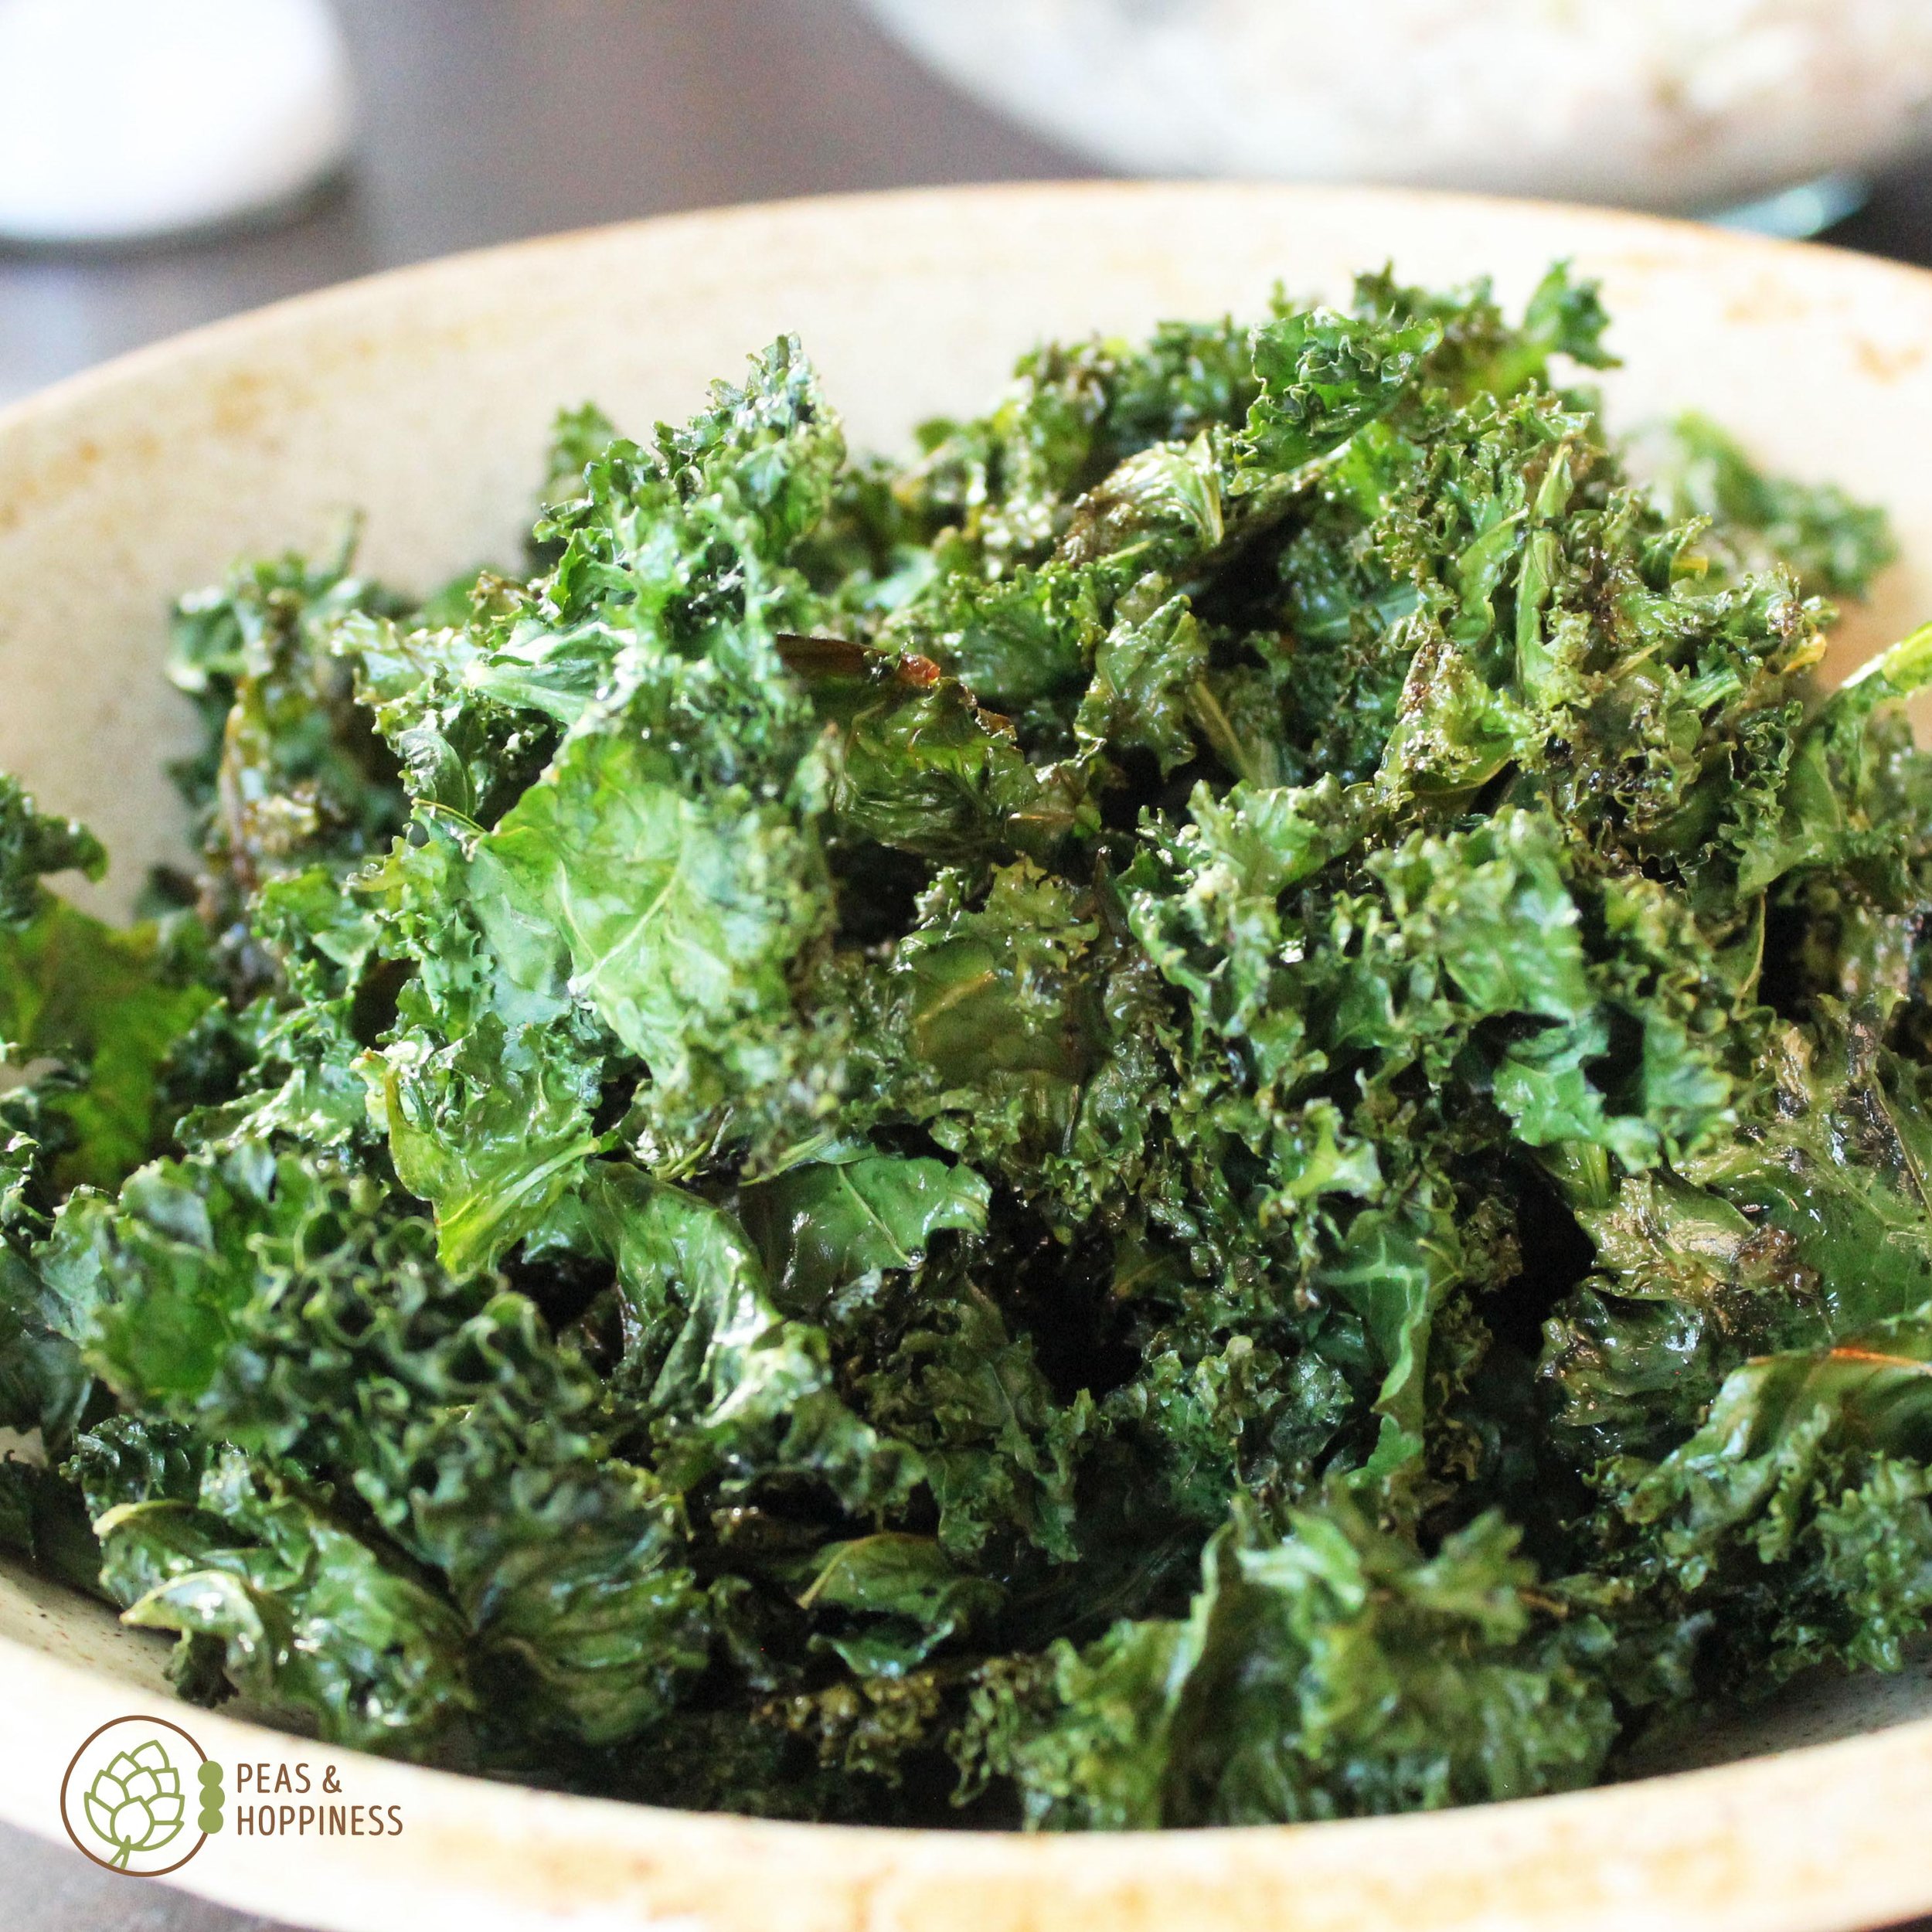 Recipe for Crispy Oven-Baked Kale Chips from Peas and Hoppiness